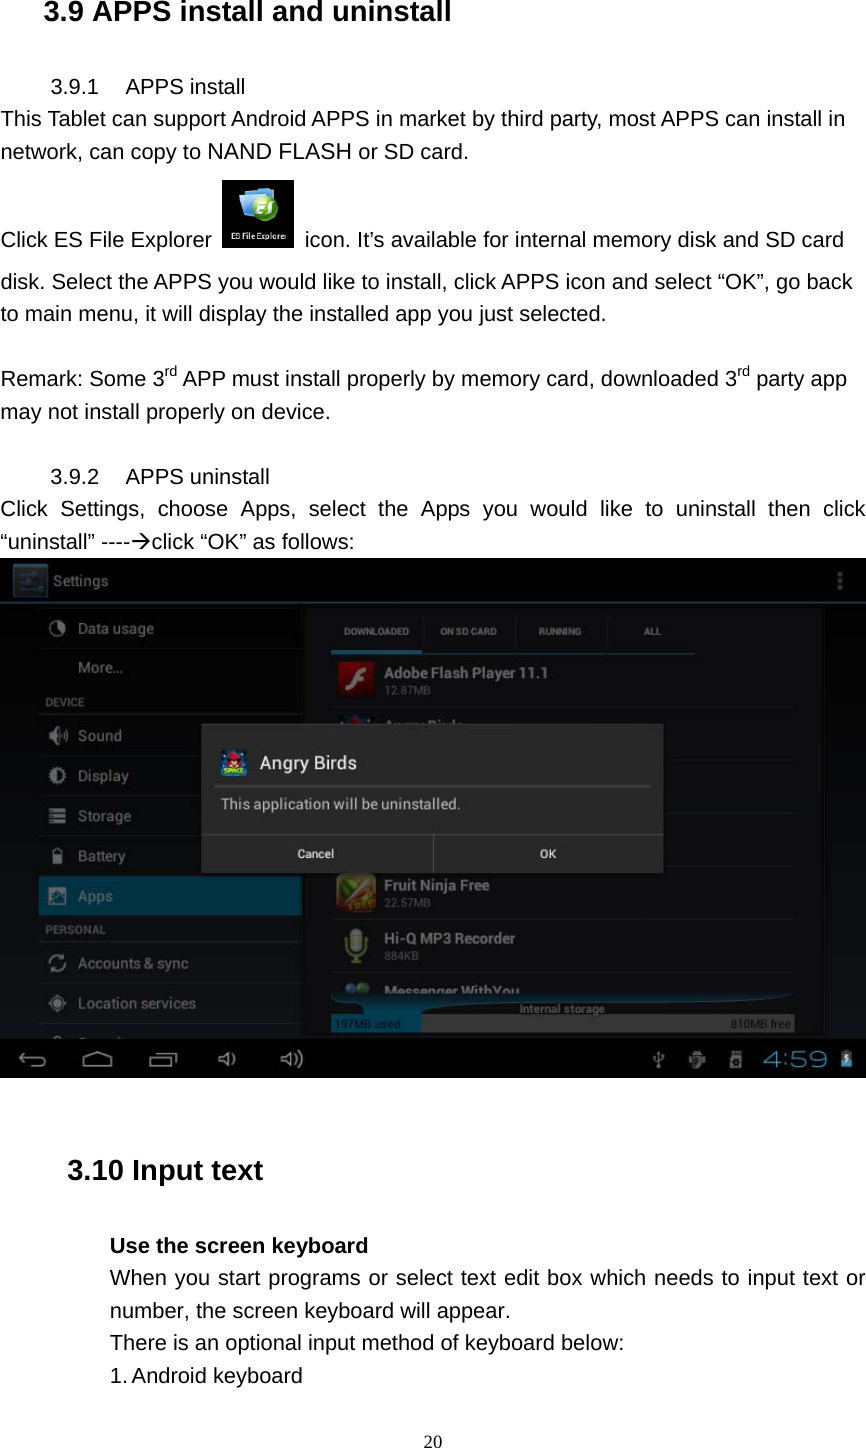    20  3.9 APPS install and uninstall 3.9.1 APPS install This Tablet can support Android APPS in market by third party, most APPS can install in network, can copy to NAND FLASH or SD card. Click ES File Explorer    icon. It’s available for internal memory disk and SD card disk. Select the APPS you would like to install, click APPS icon and select “OK”, go back to main menu, it will display the installed app you just selected.  Remark: Some 3rd APP must install properly by memory card, downloaded 3rd party app may not install properly on device.  3.9.2 APPS uninstall Click Settings, choose Apps, select the Apps you would like to uninstall then click “uninstall” ----Æclick “OK” as follows:   3.10 Input text Use the screen keyboard When you start programs or select text edit box which needs to input text or number, the screen keyboard will appear. There is an optional input method of keyboard below: 1. Android keyboard 